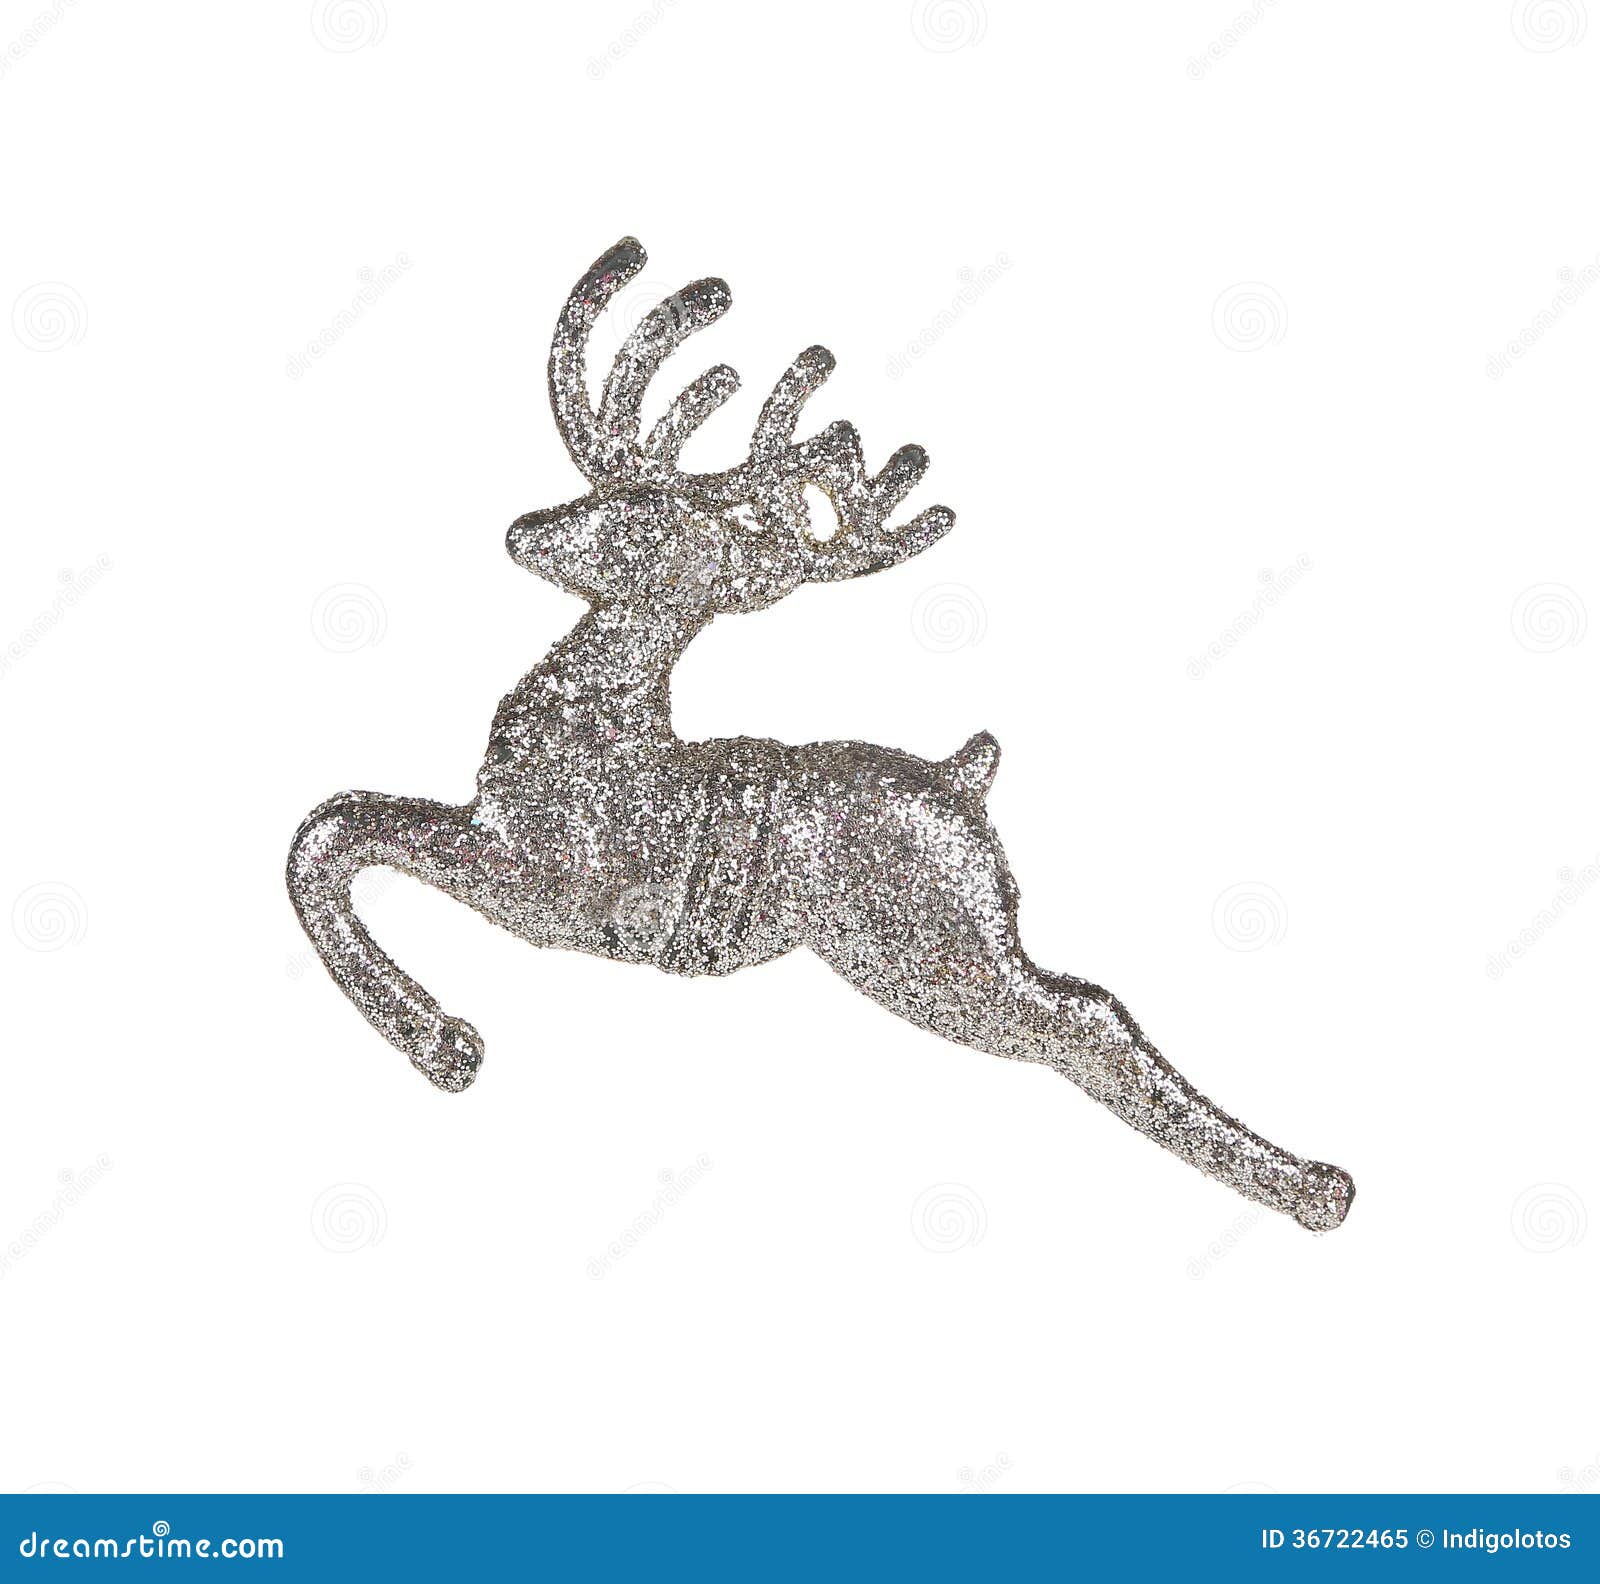 Leaping Reindeer Glitter Christmas Ornament. Royalty Free 